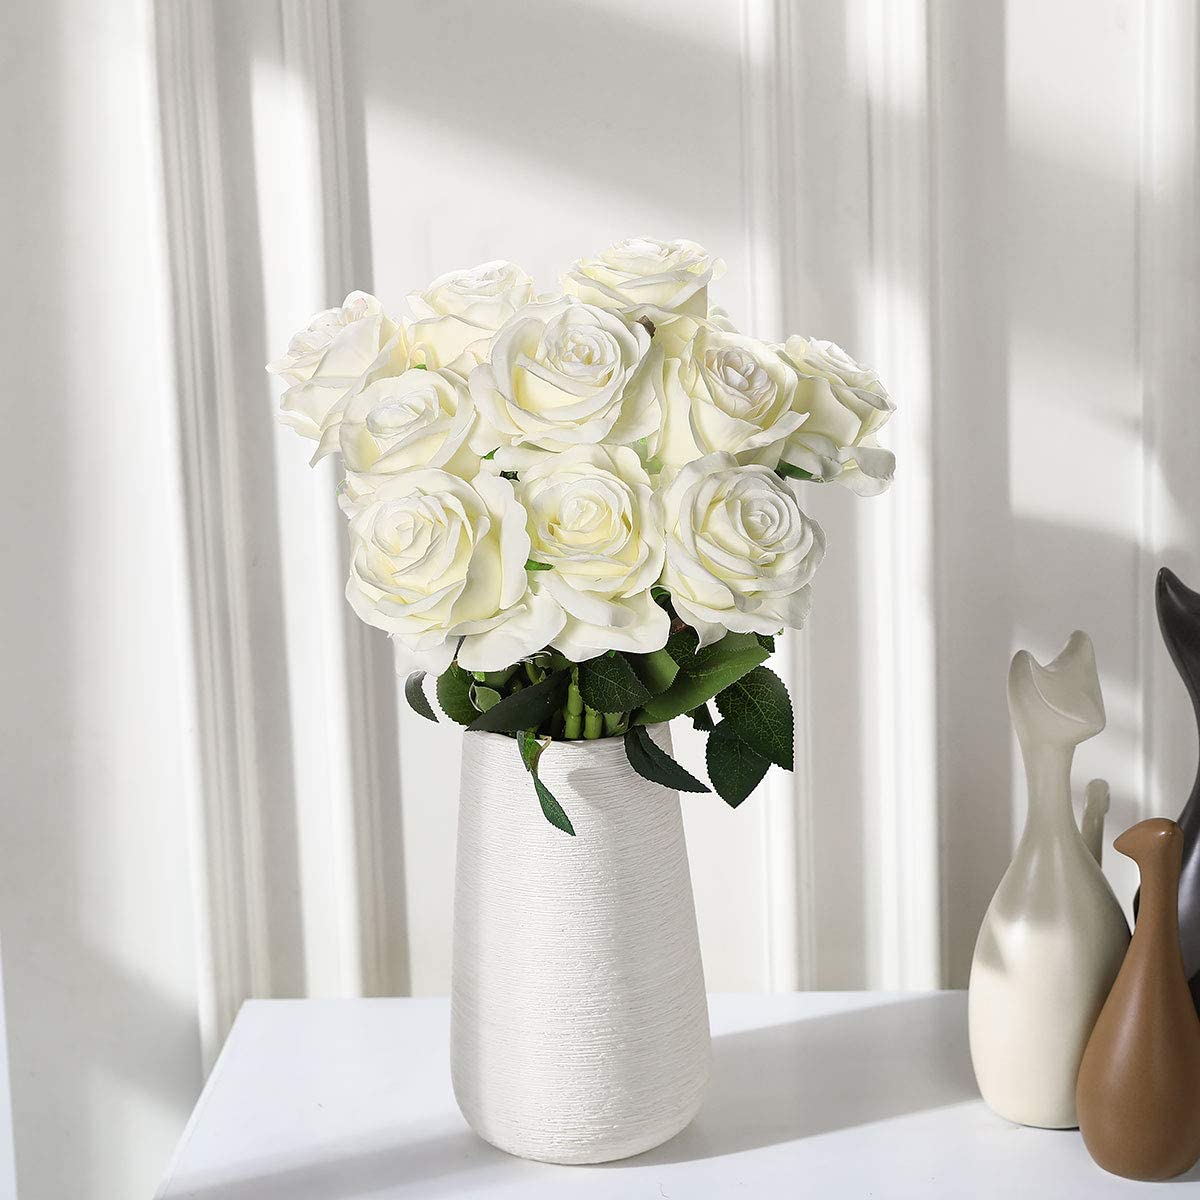 19.68'' Single Long Stem Fake Rose Silk Bridal Wedding Bouquet Realistic Flower for Home Garden Party Hotel Office Decor Blossom Roses,Champagne Tifuly 12 PCS Artificial Roses